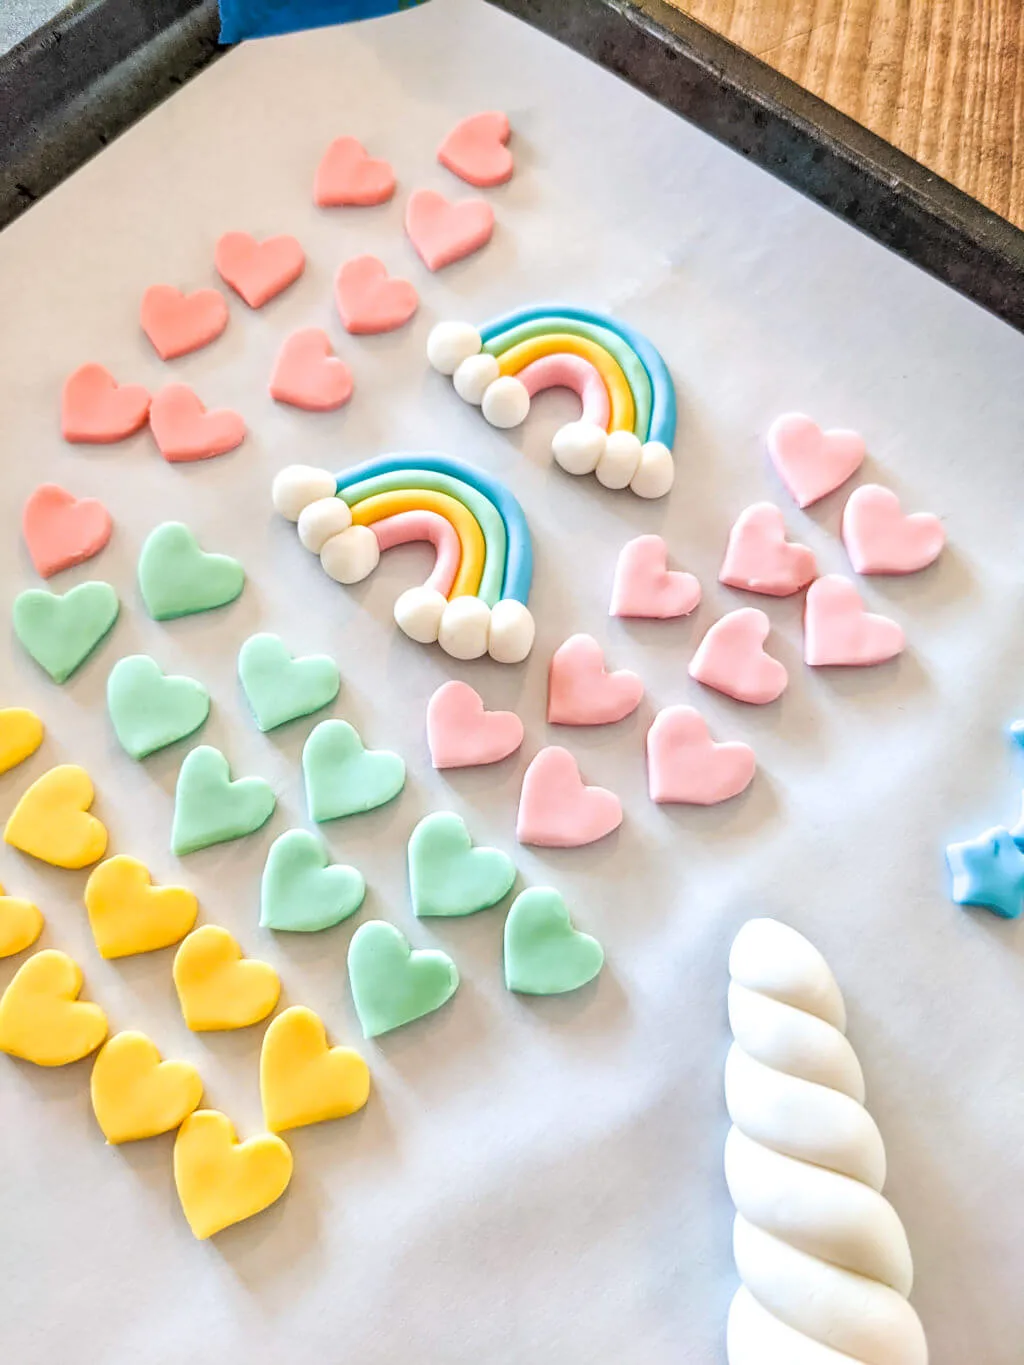 fondant stars, rainbows, and unicorn horn cake toppers for a unicorn birthday cake